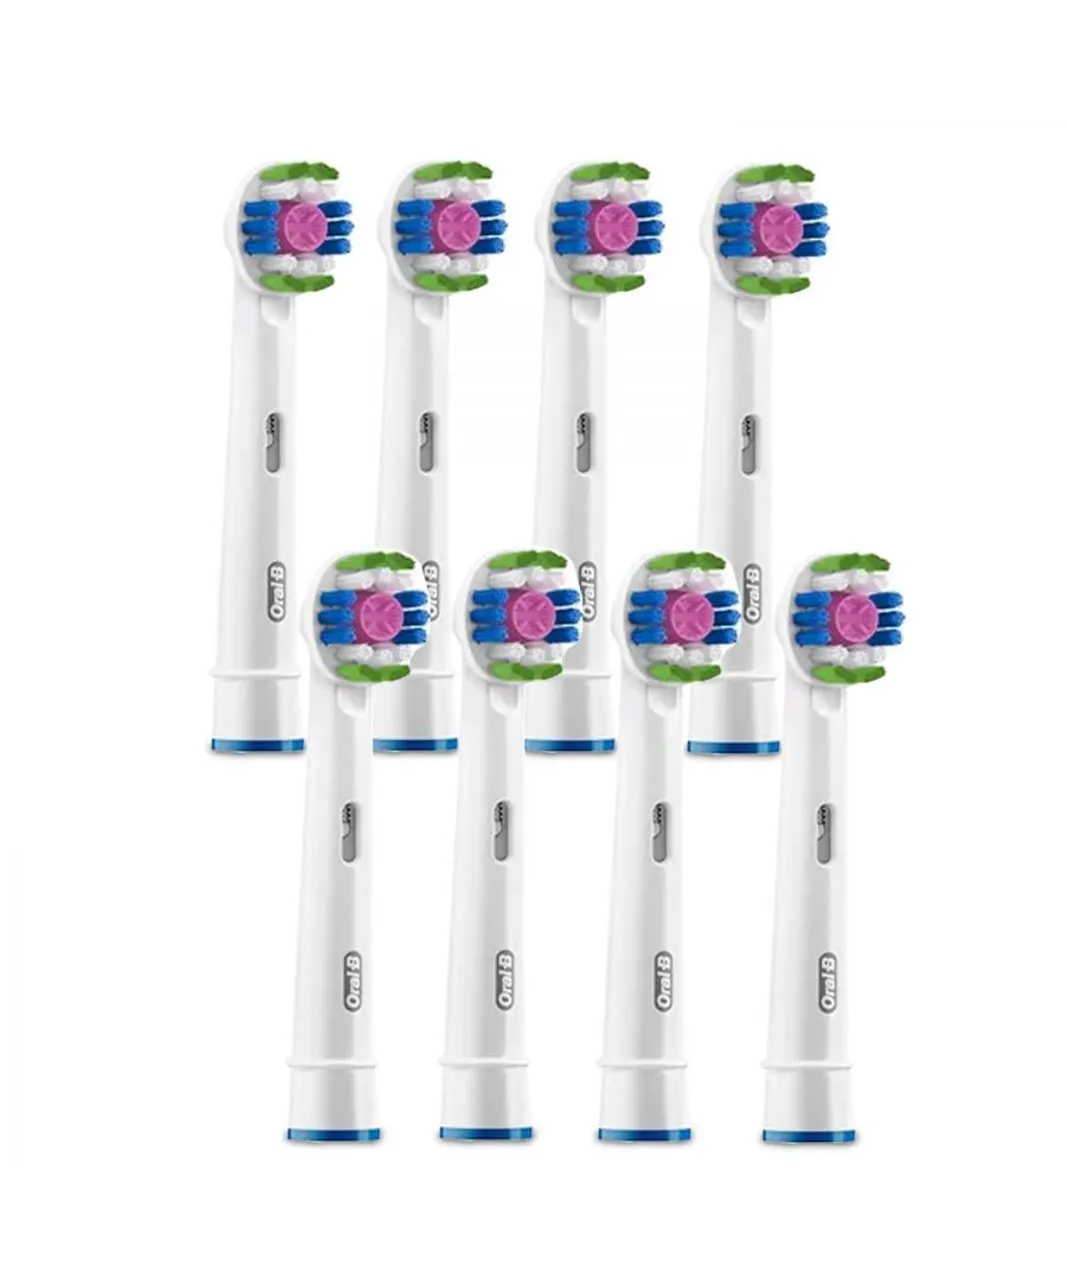 Oral B Unisex Oral-B 3D White Power Toothbrush Refill Heads, Pack of 8 - Green - One Size